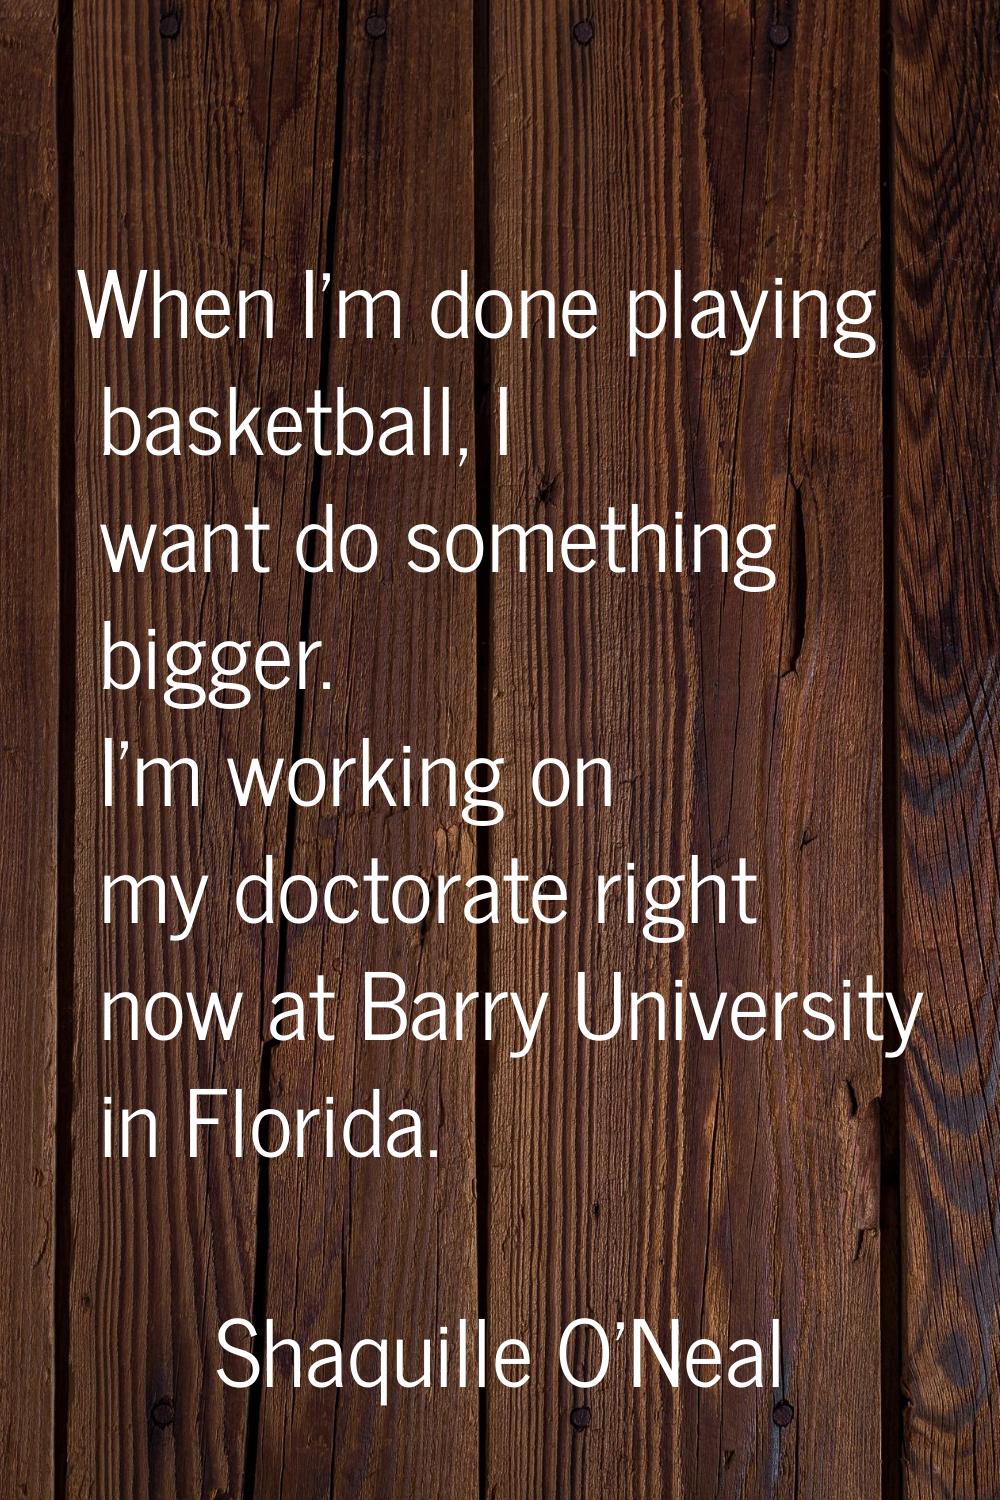 When I'm done playing basketball, I want do something bigger. I'm working on my doctorate right now